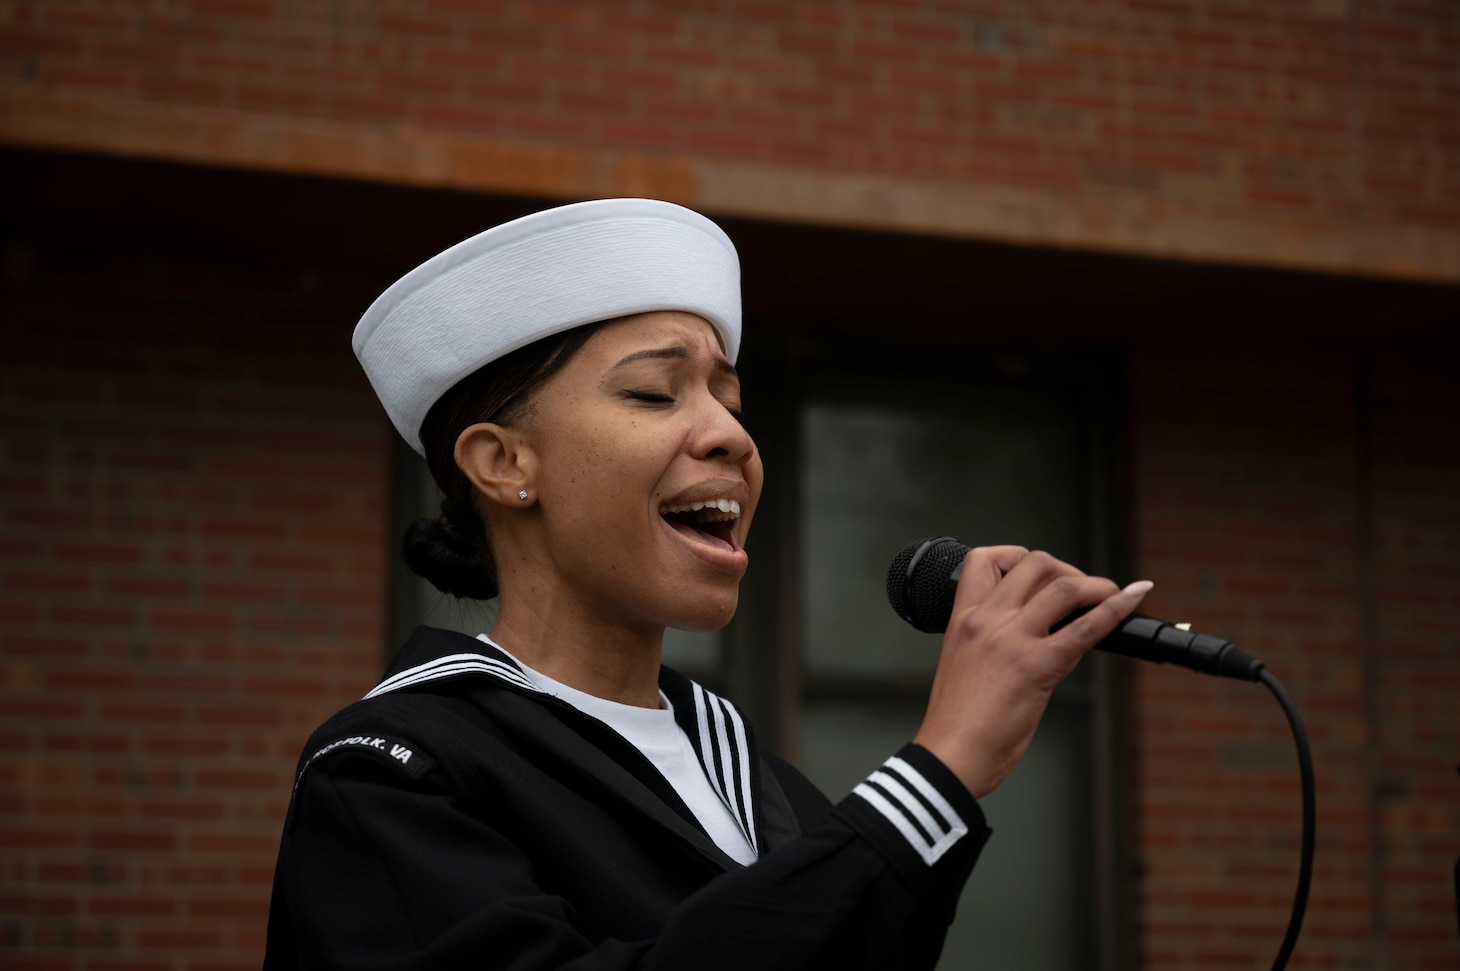 Personnel Specialist 3rd Class Sheaon Howard sings the national anthem during the launch ceremony for Mobilization and Deployment Support Command.